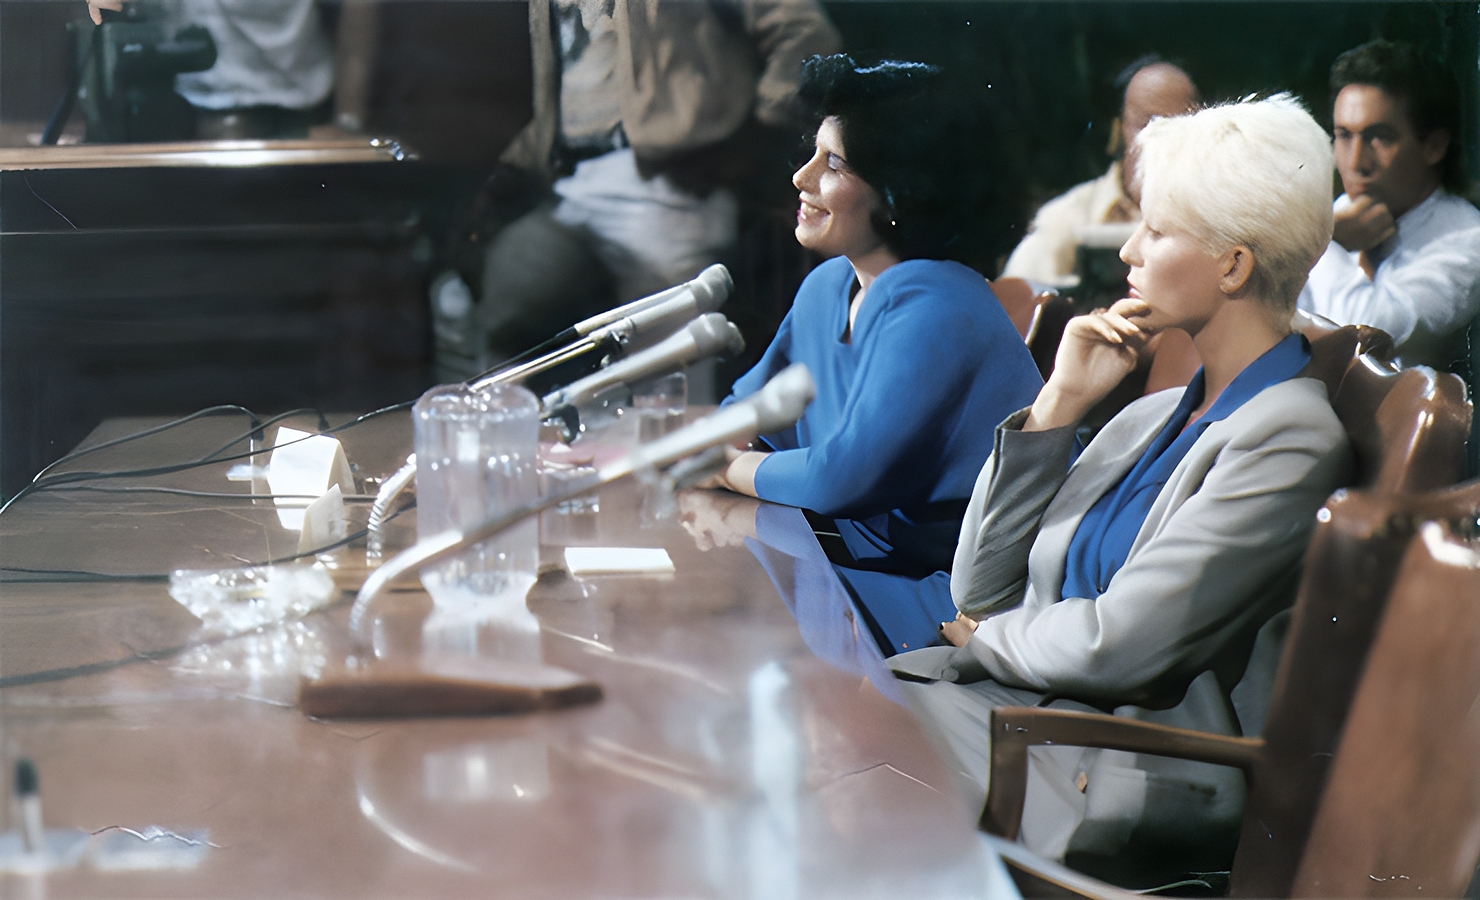 Adult entertainment actresses Veronica Vera and Seka giving testimony on freedom of expression, before a Senate Judiciary Committee, regarding the anti-pornography Meese Commission. 1985..jpg